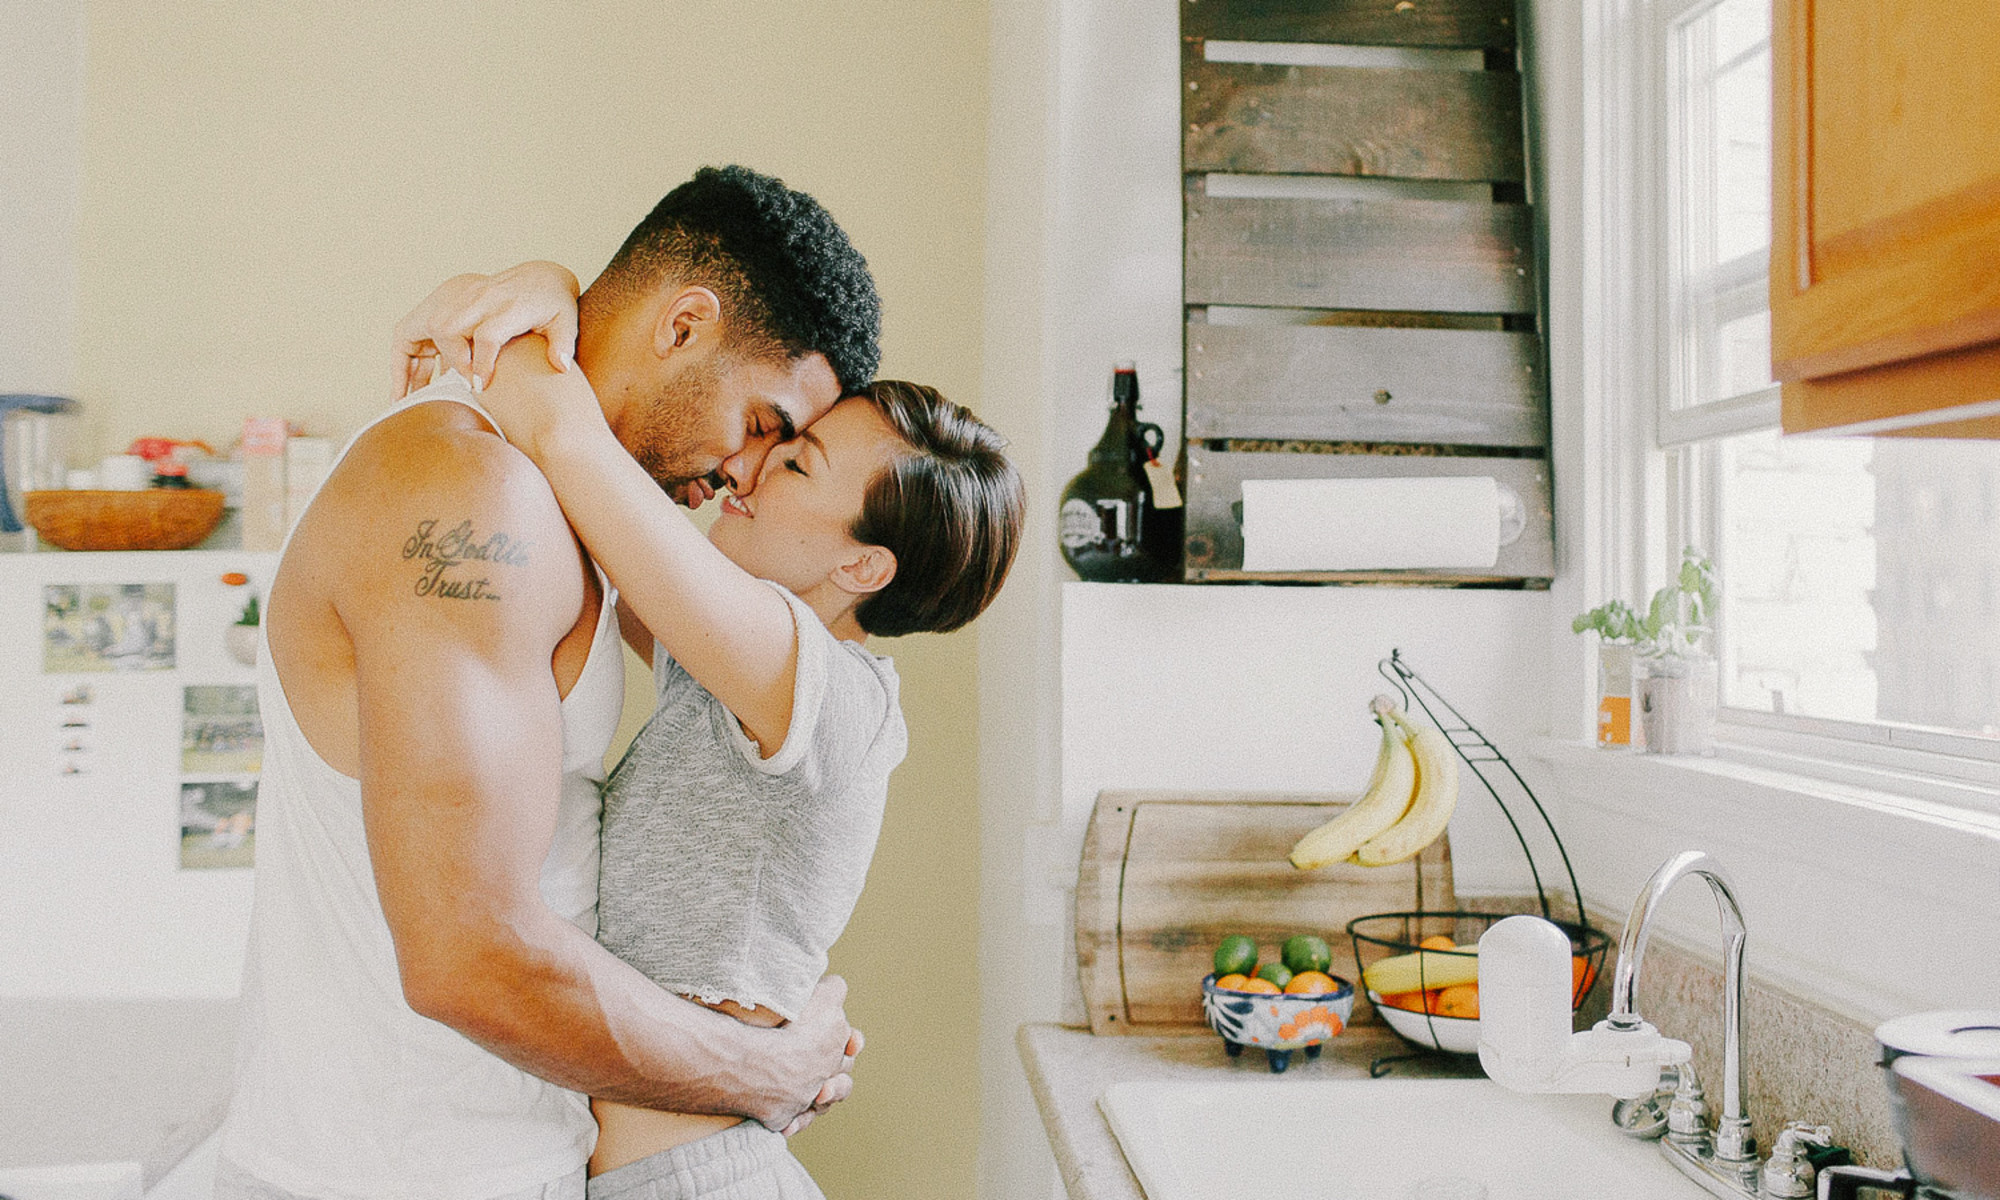 How Many Calories Does Kissing Burn? Heres The Research mindbodygreen